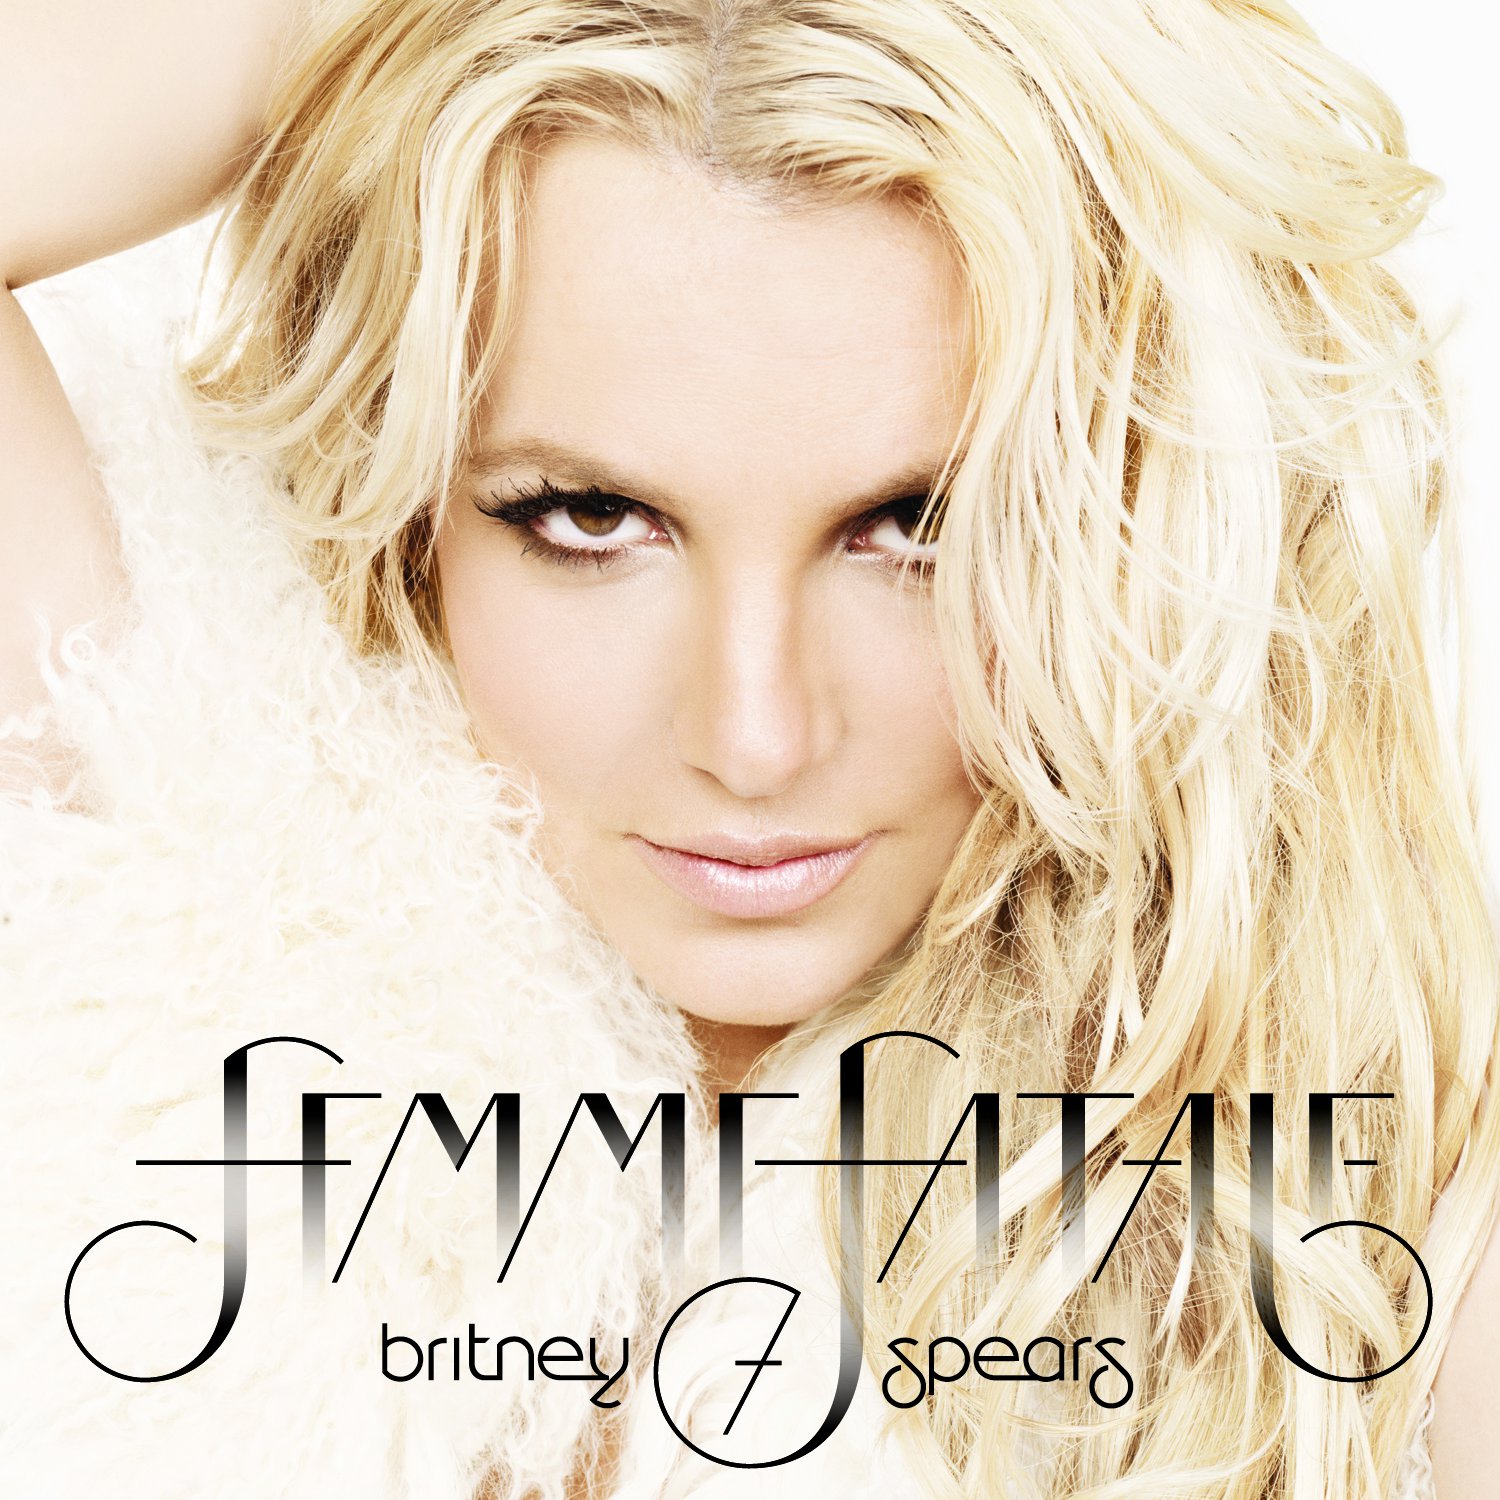 Britney's little known song Selfish is from her 2011 album Femme Fatale